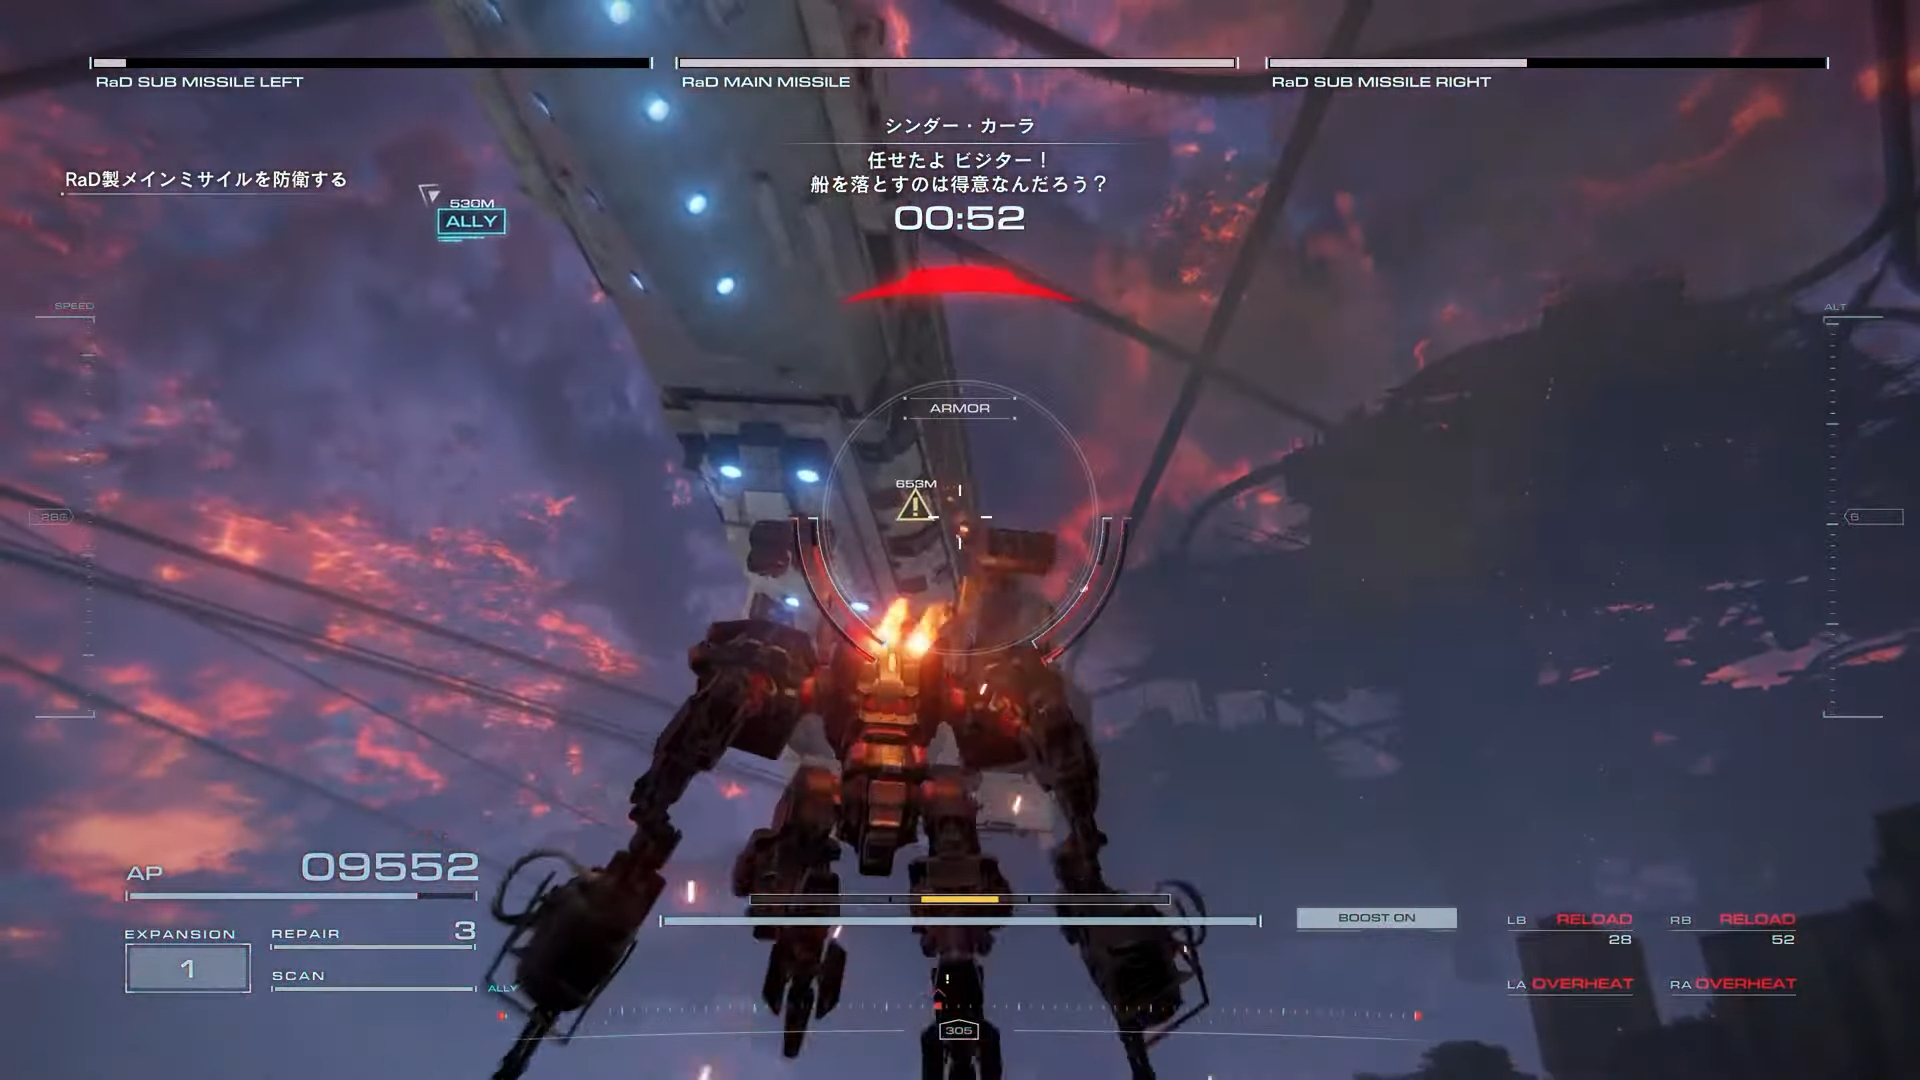  【PS5】ARMORED CORE Ⅵ FIRES OF RUBICON : Video Games